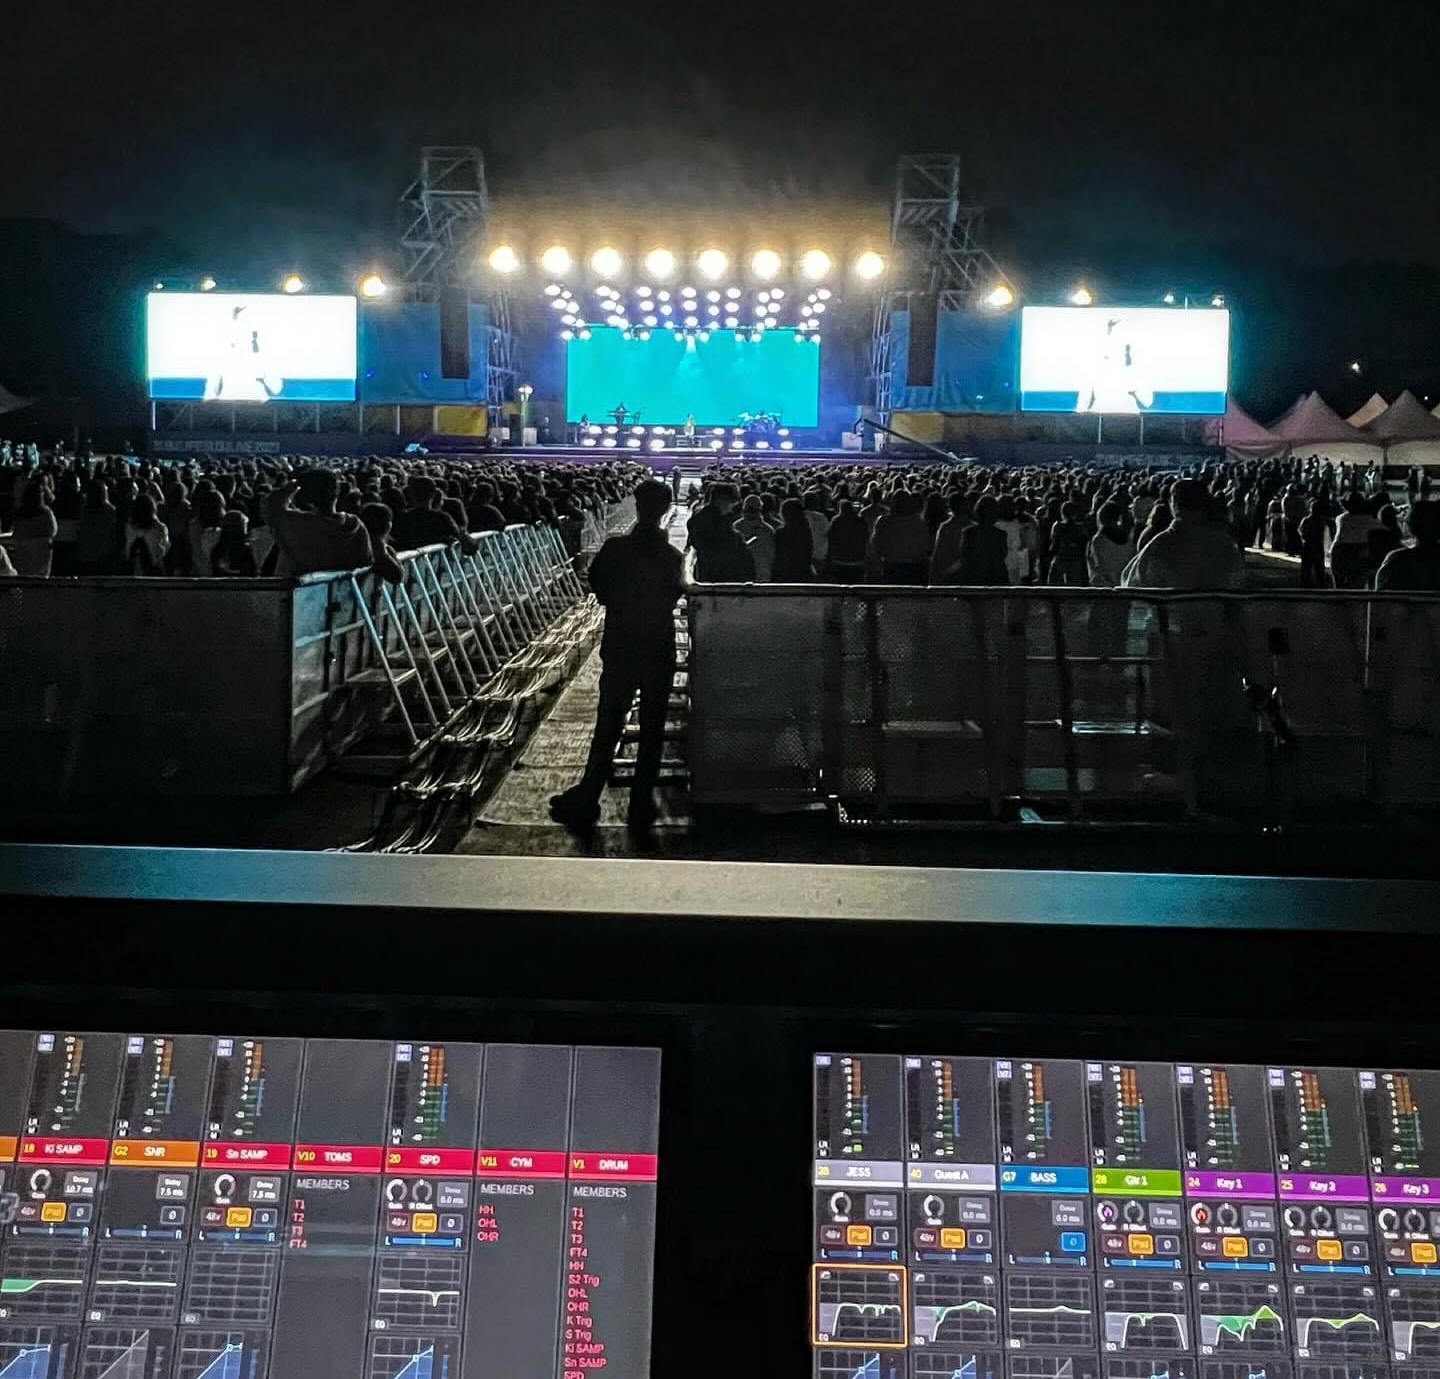 View from a console of an outdoor concert event